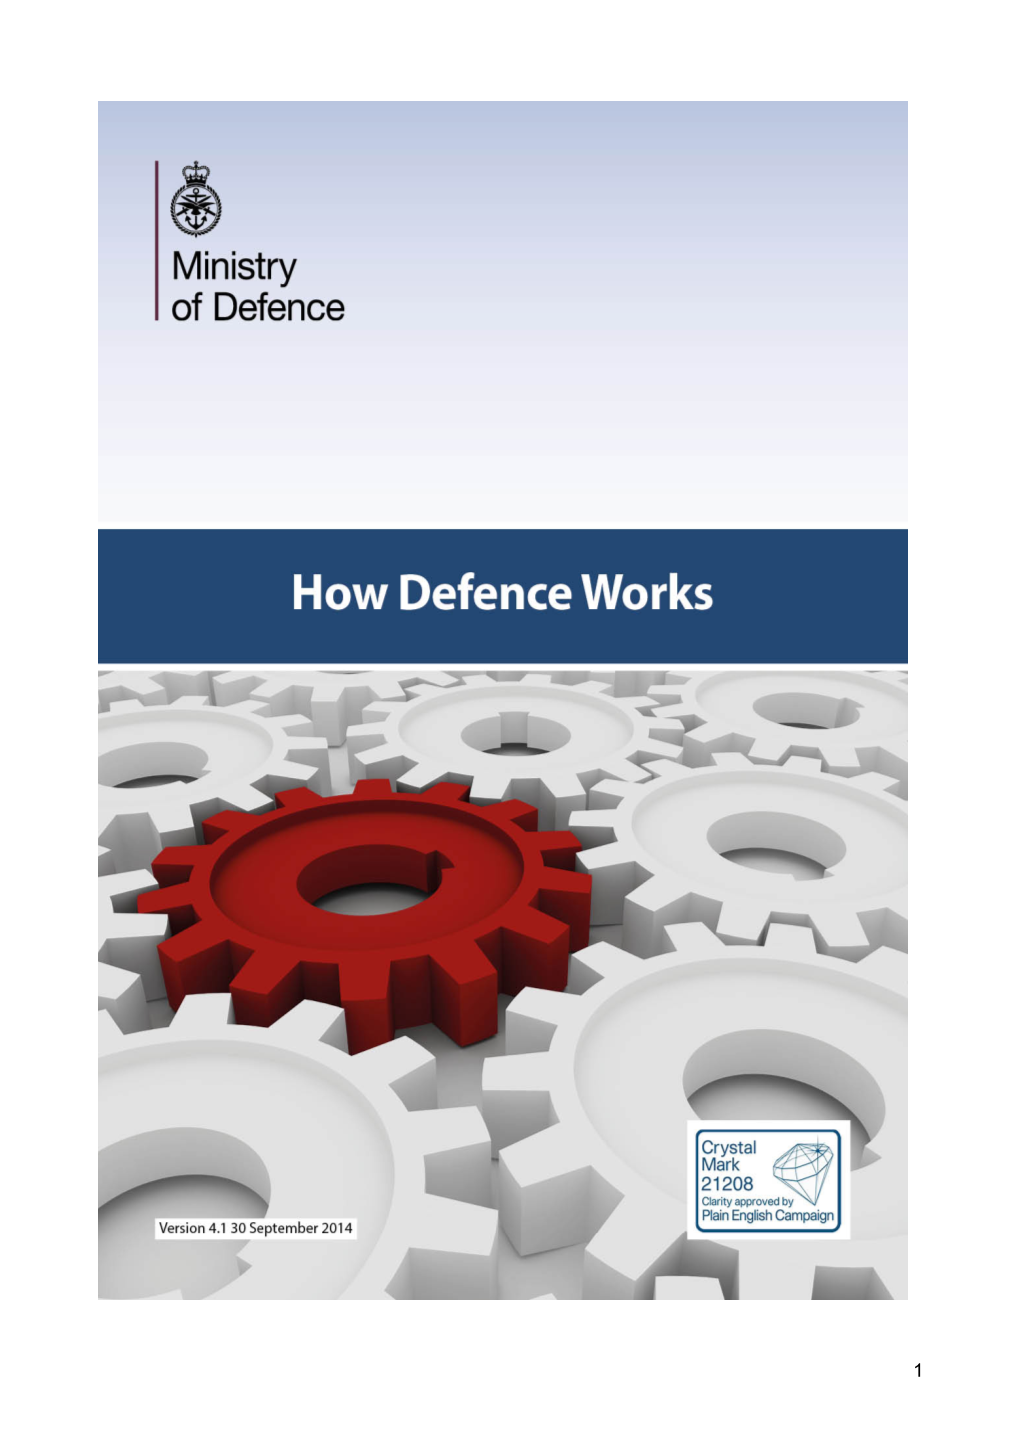 How Defence Works’ Brings These Together Into a Single Document Carrying the Full Authority of the Defence Board